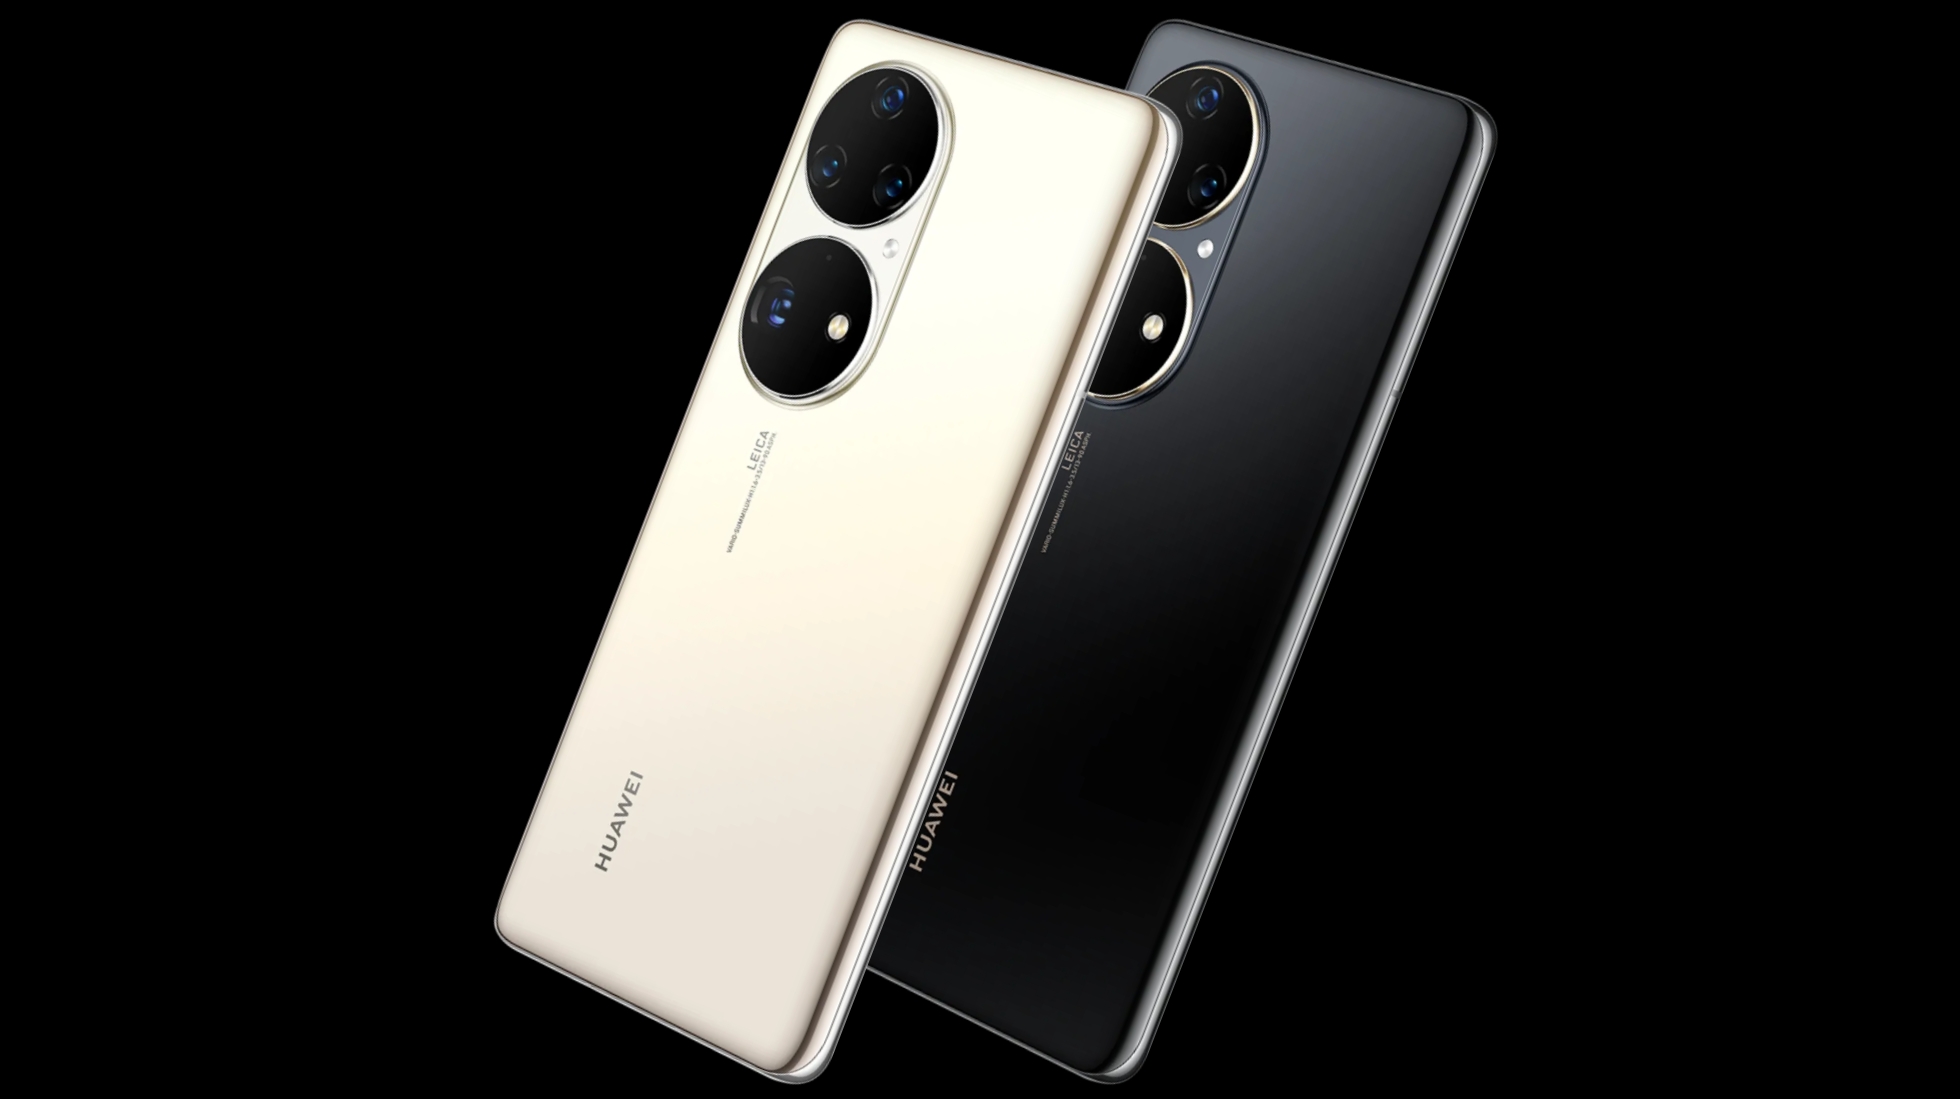 Two Huawei P50 Pro models from the back, against a black background